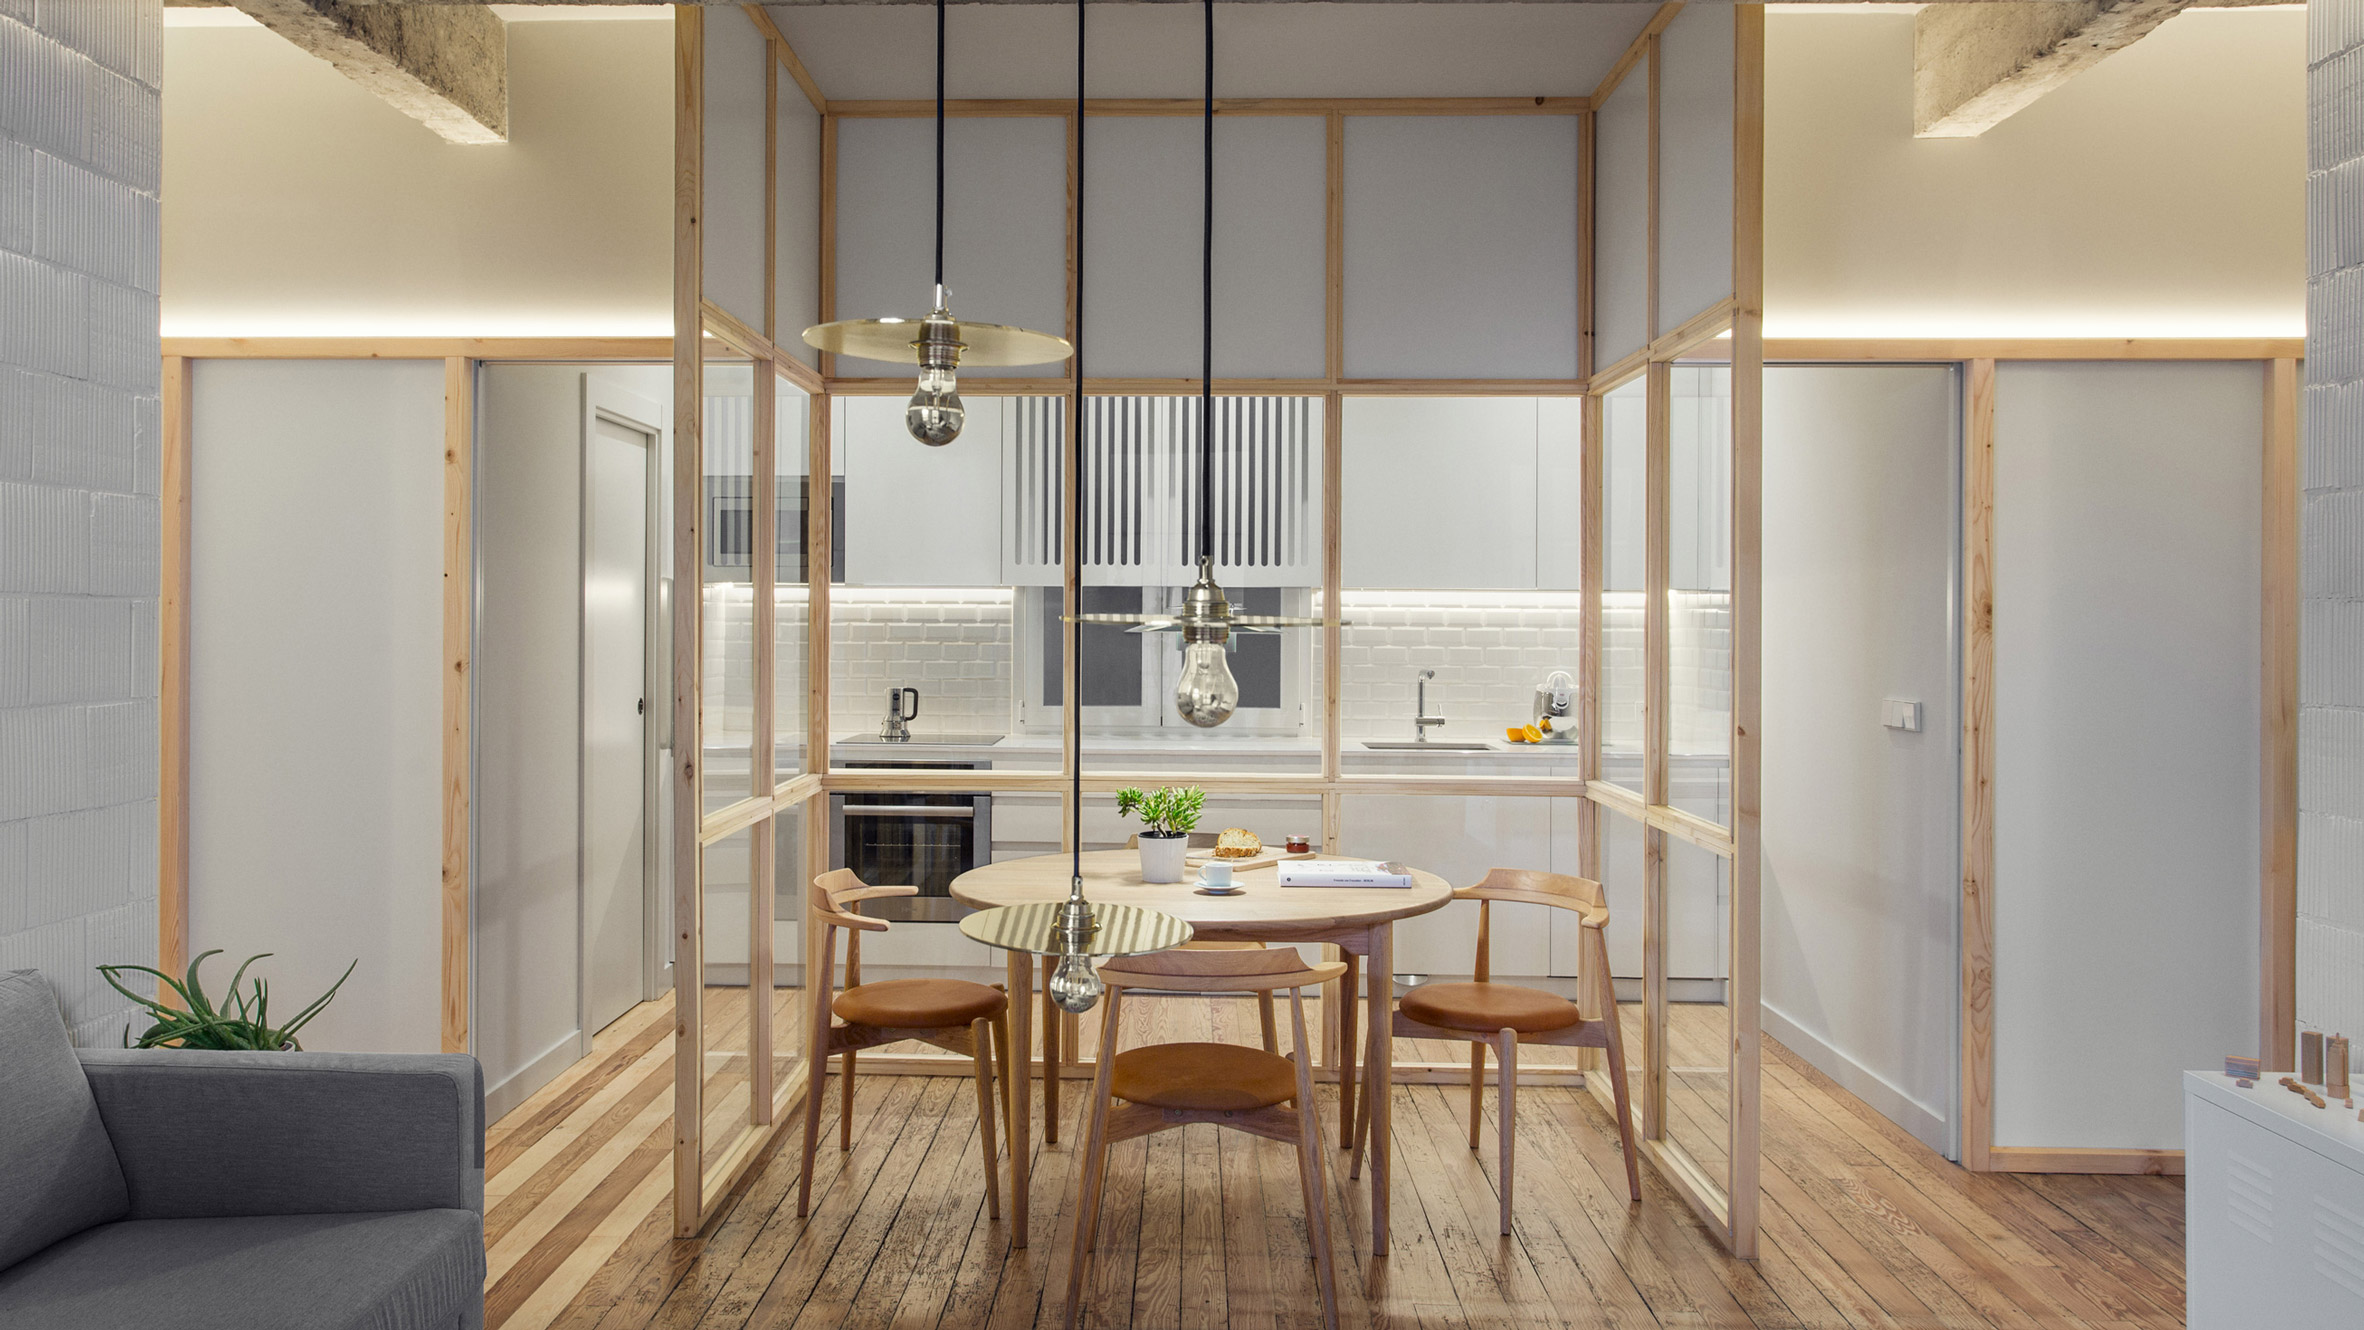 A kitchen with a glass partition